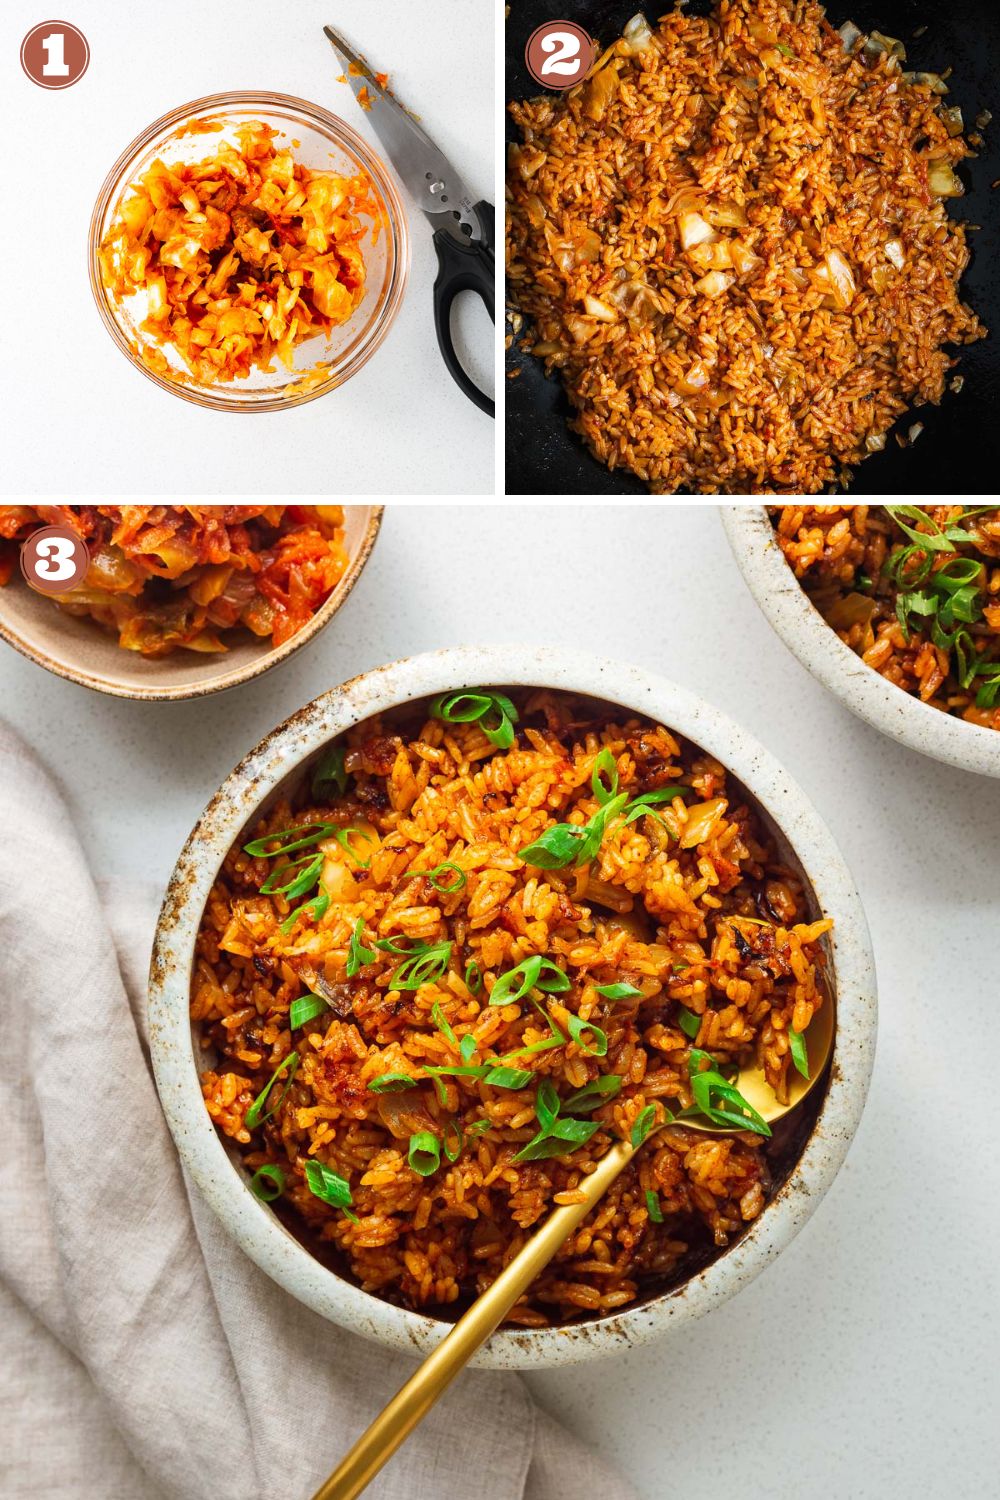 A composite image depicting the three steps for how to make gochujang fried rice: prep ingredients, stir-fry and serve.